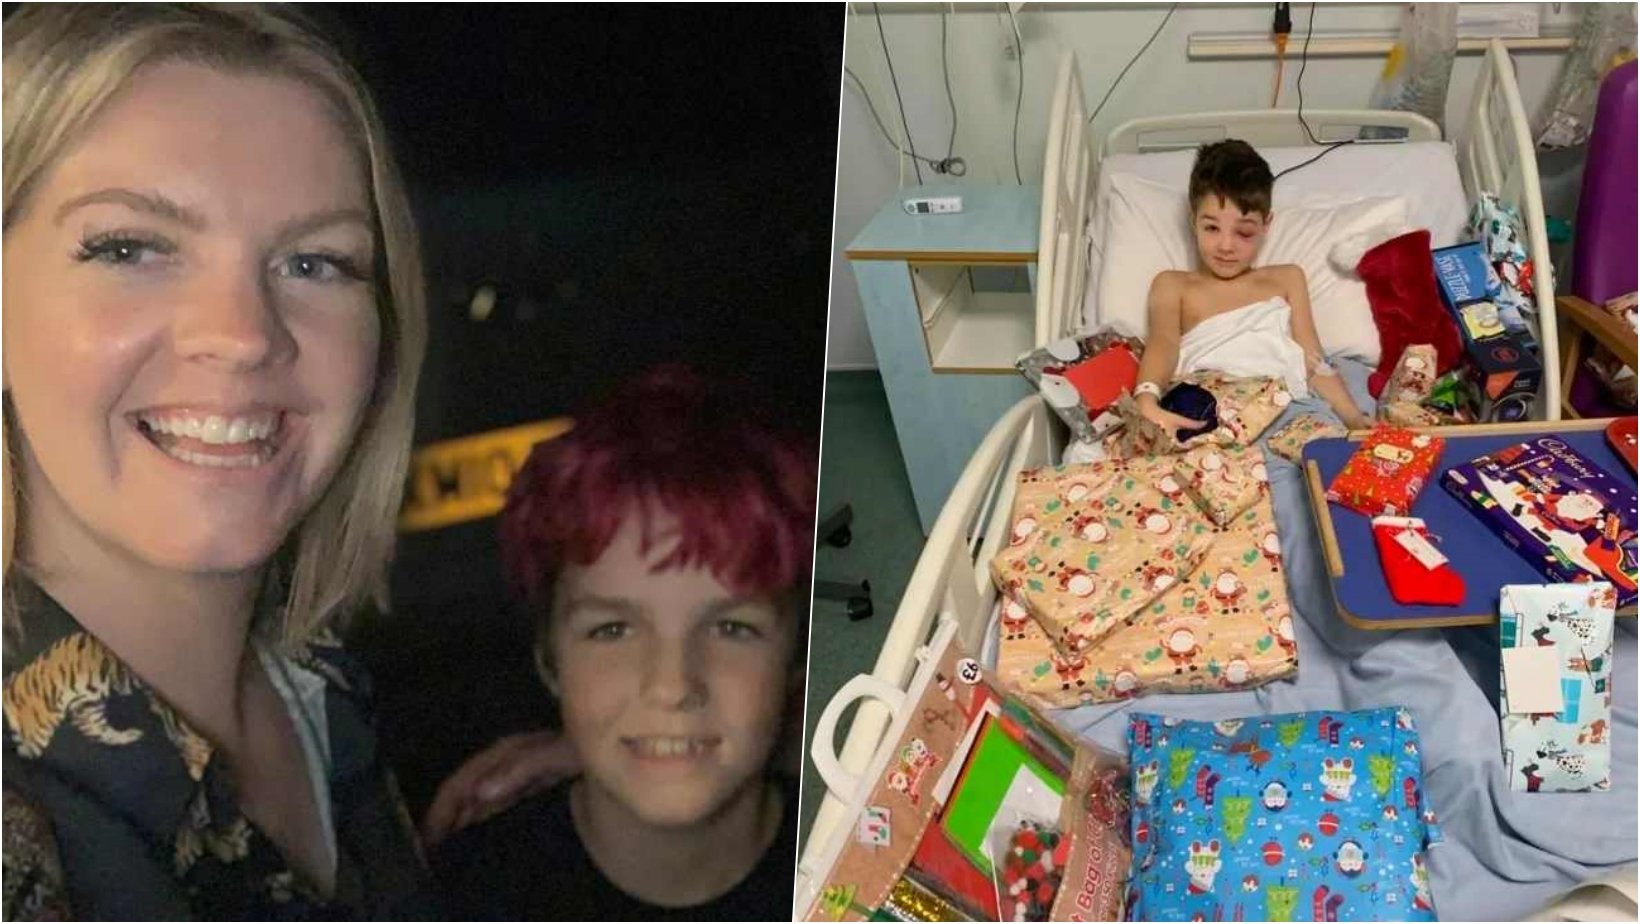 6 facebook cover 1.jpg?resize=412,275 - 9-Year-Old Boy Spends Christmas In Hospital After Being Infected With “COVID EYE”